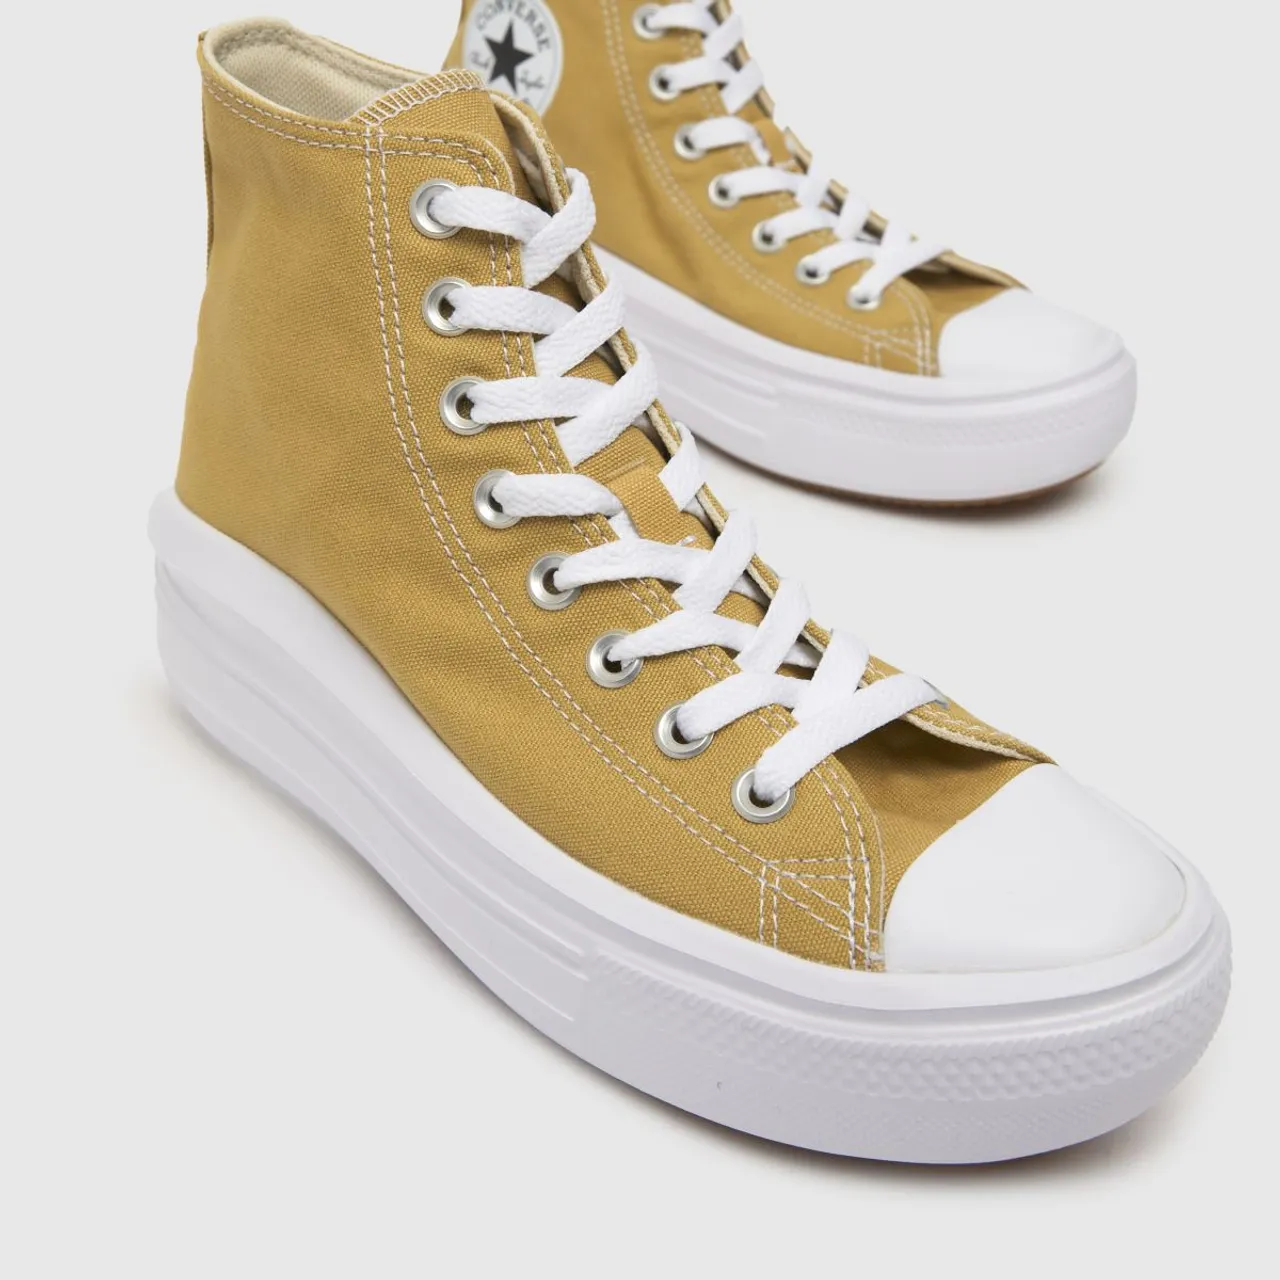 Converse All Star Move Trainers In Mustard Yellow